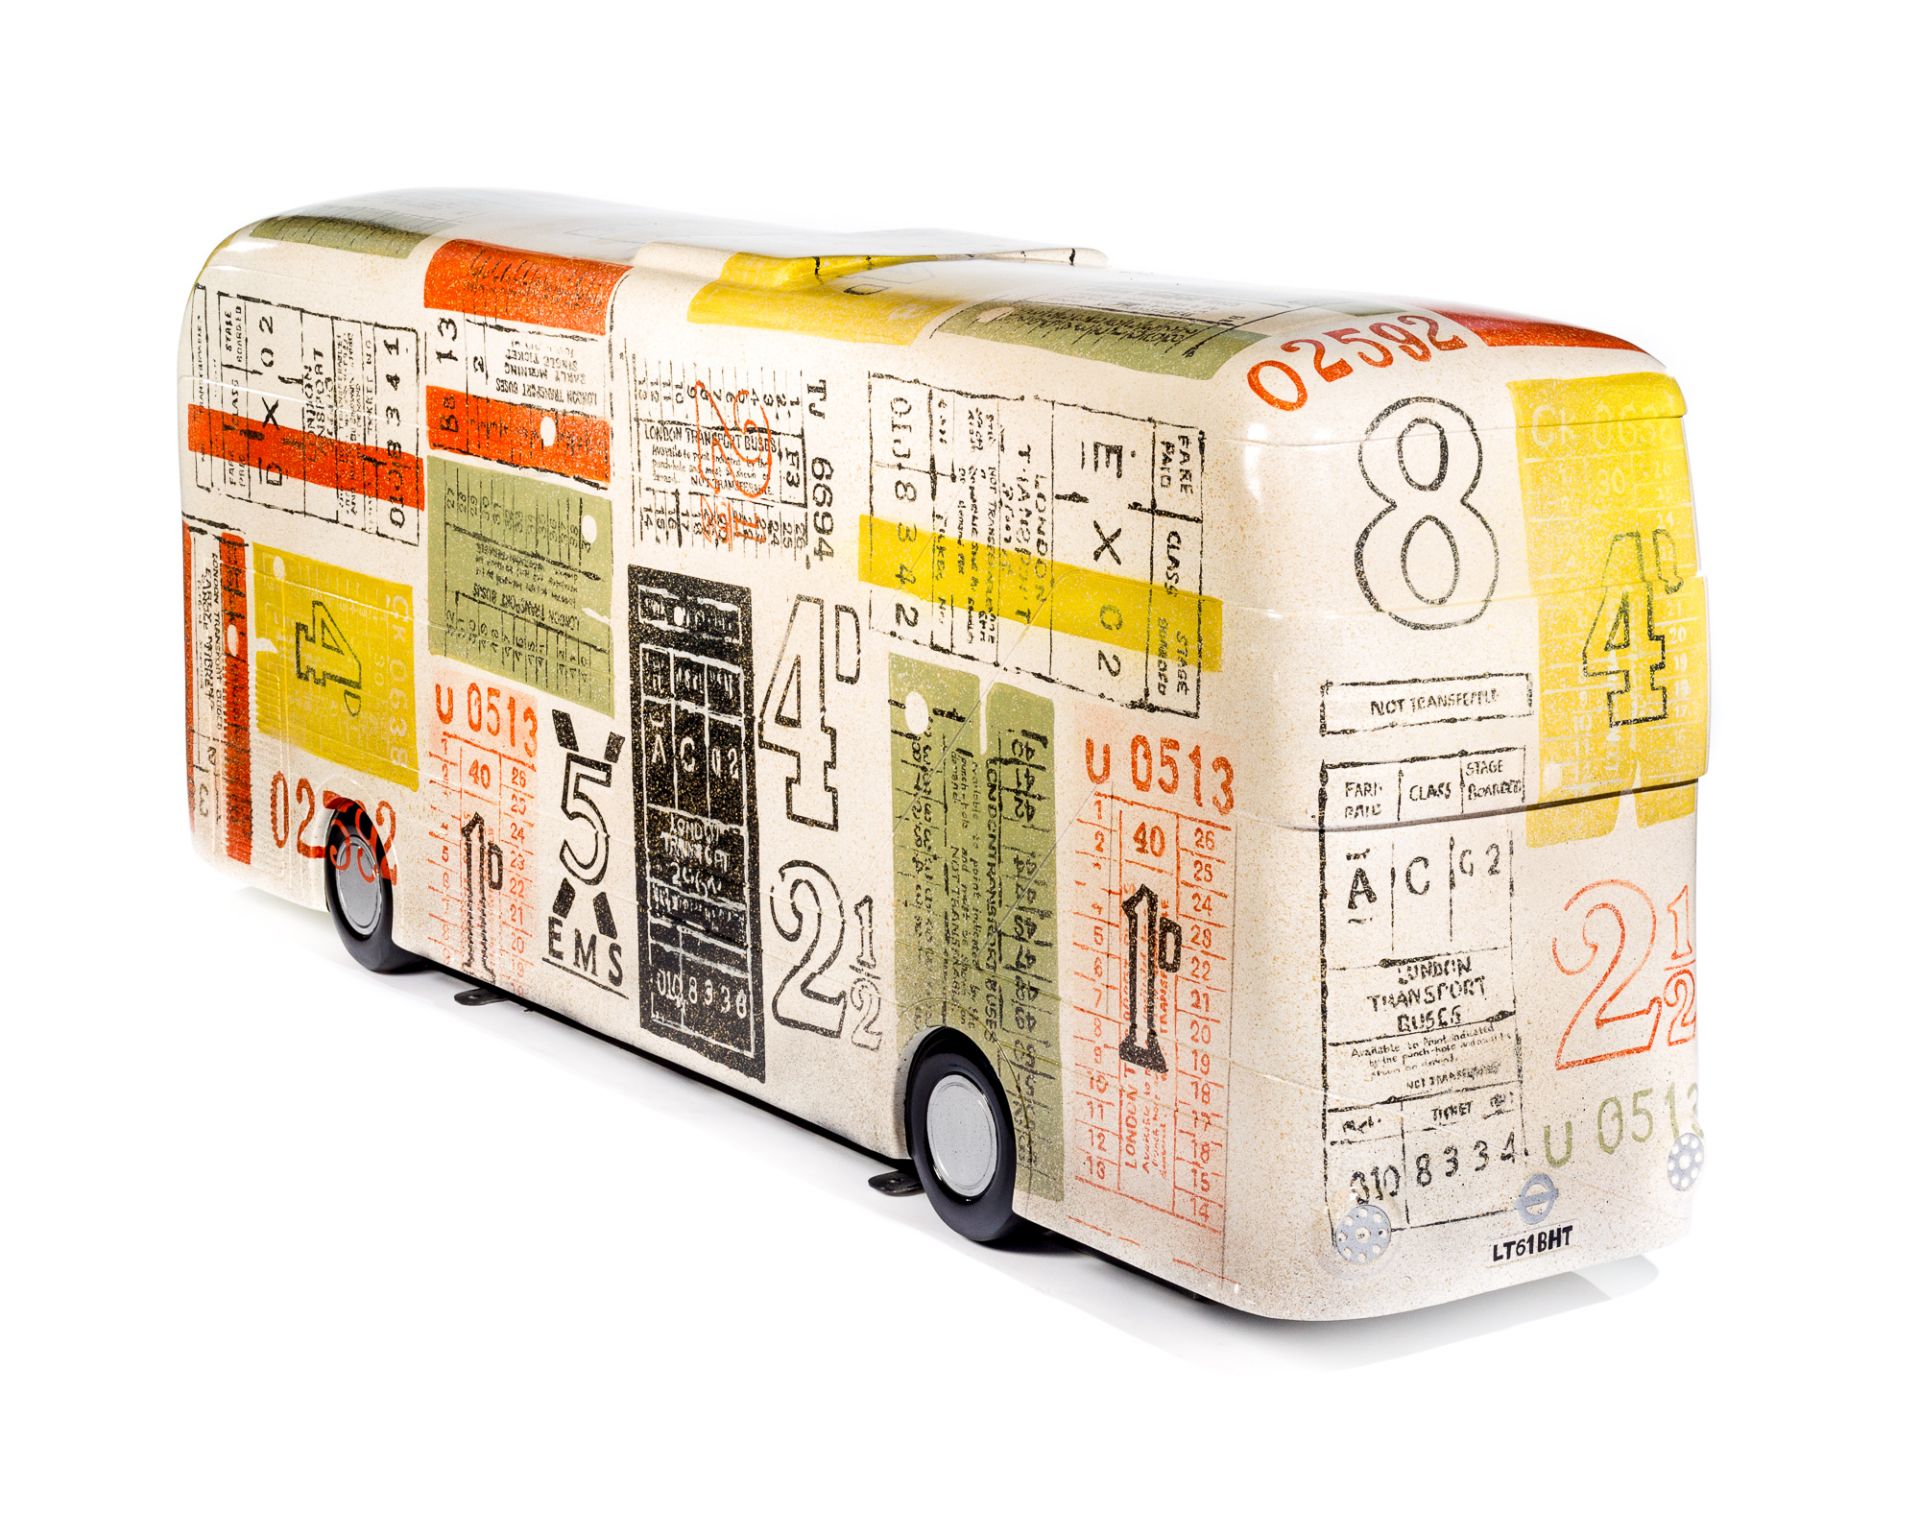 Artist: Mini Moderns, painted by Jane Headford  Design: Hold Tight    About the design   Launched in